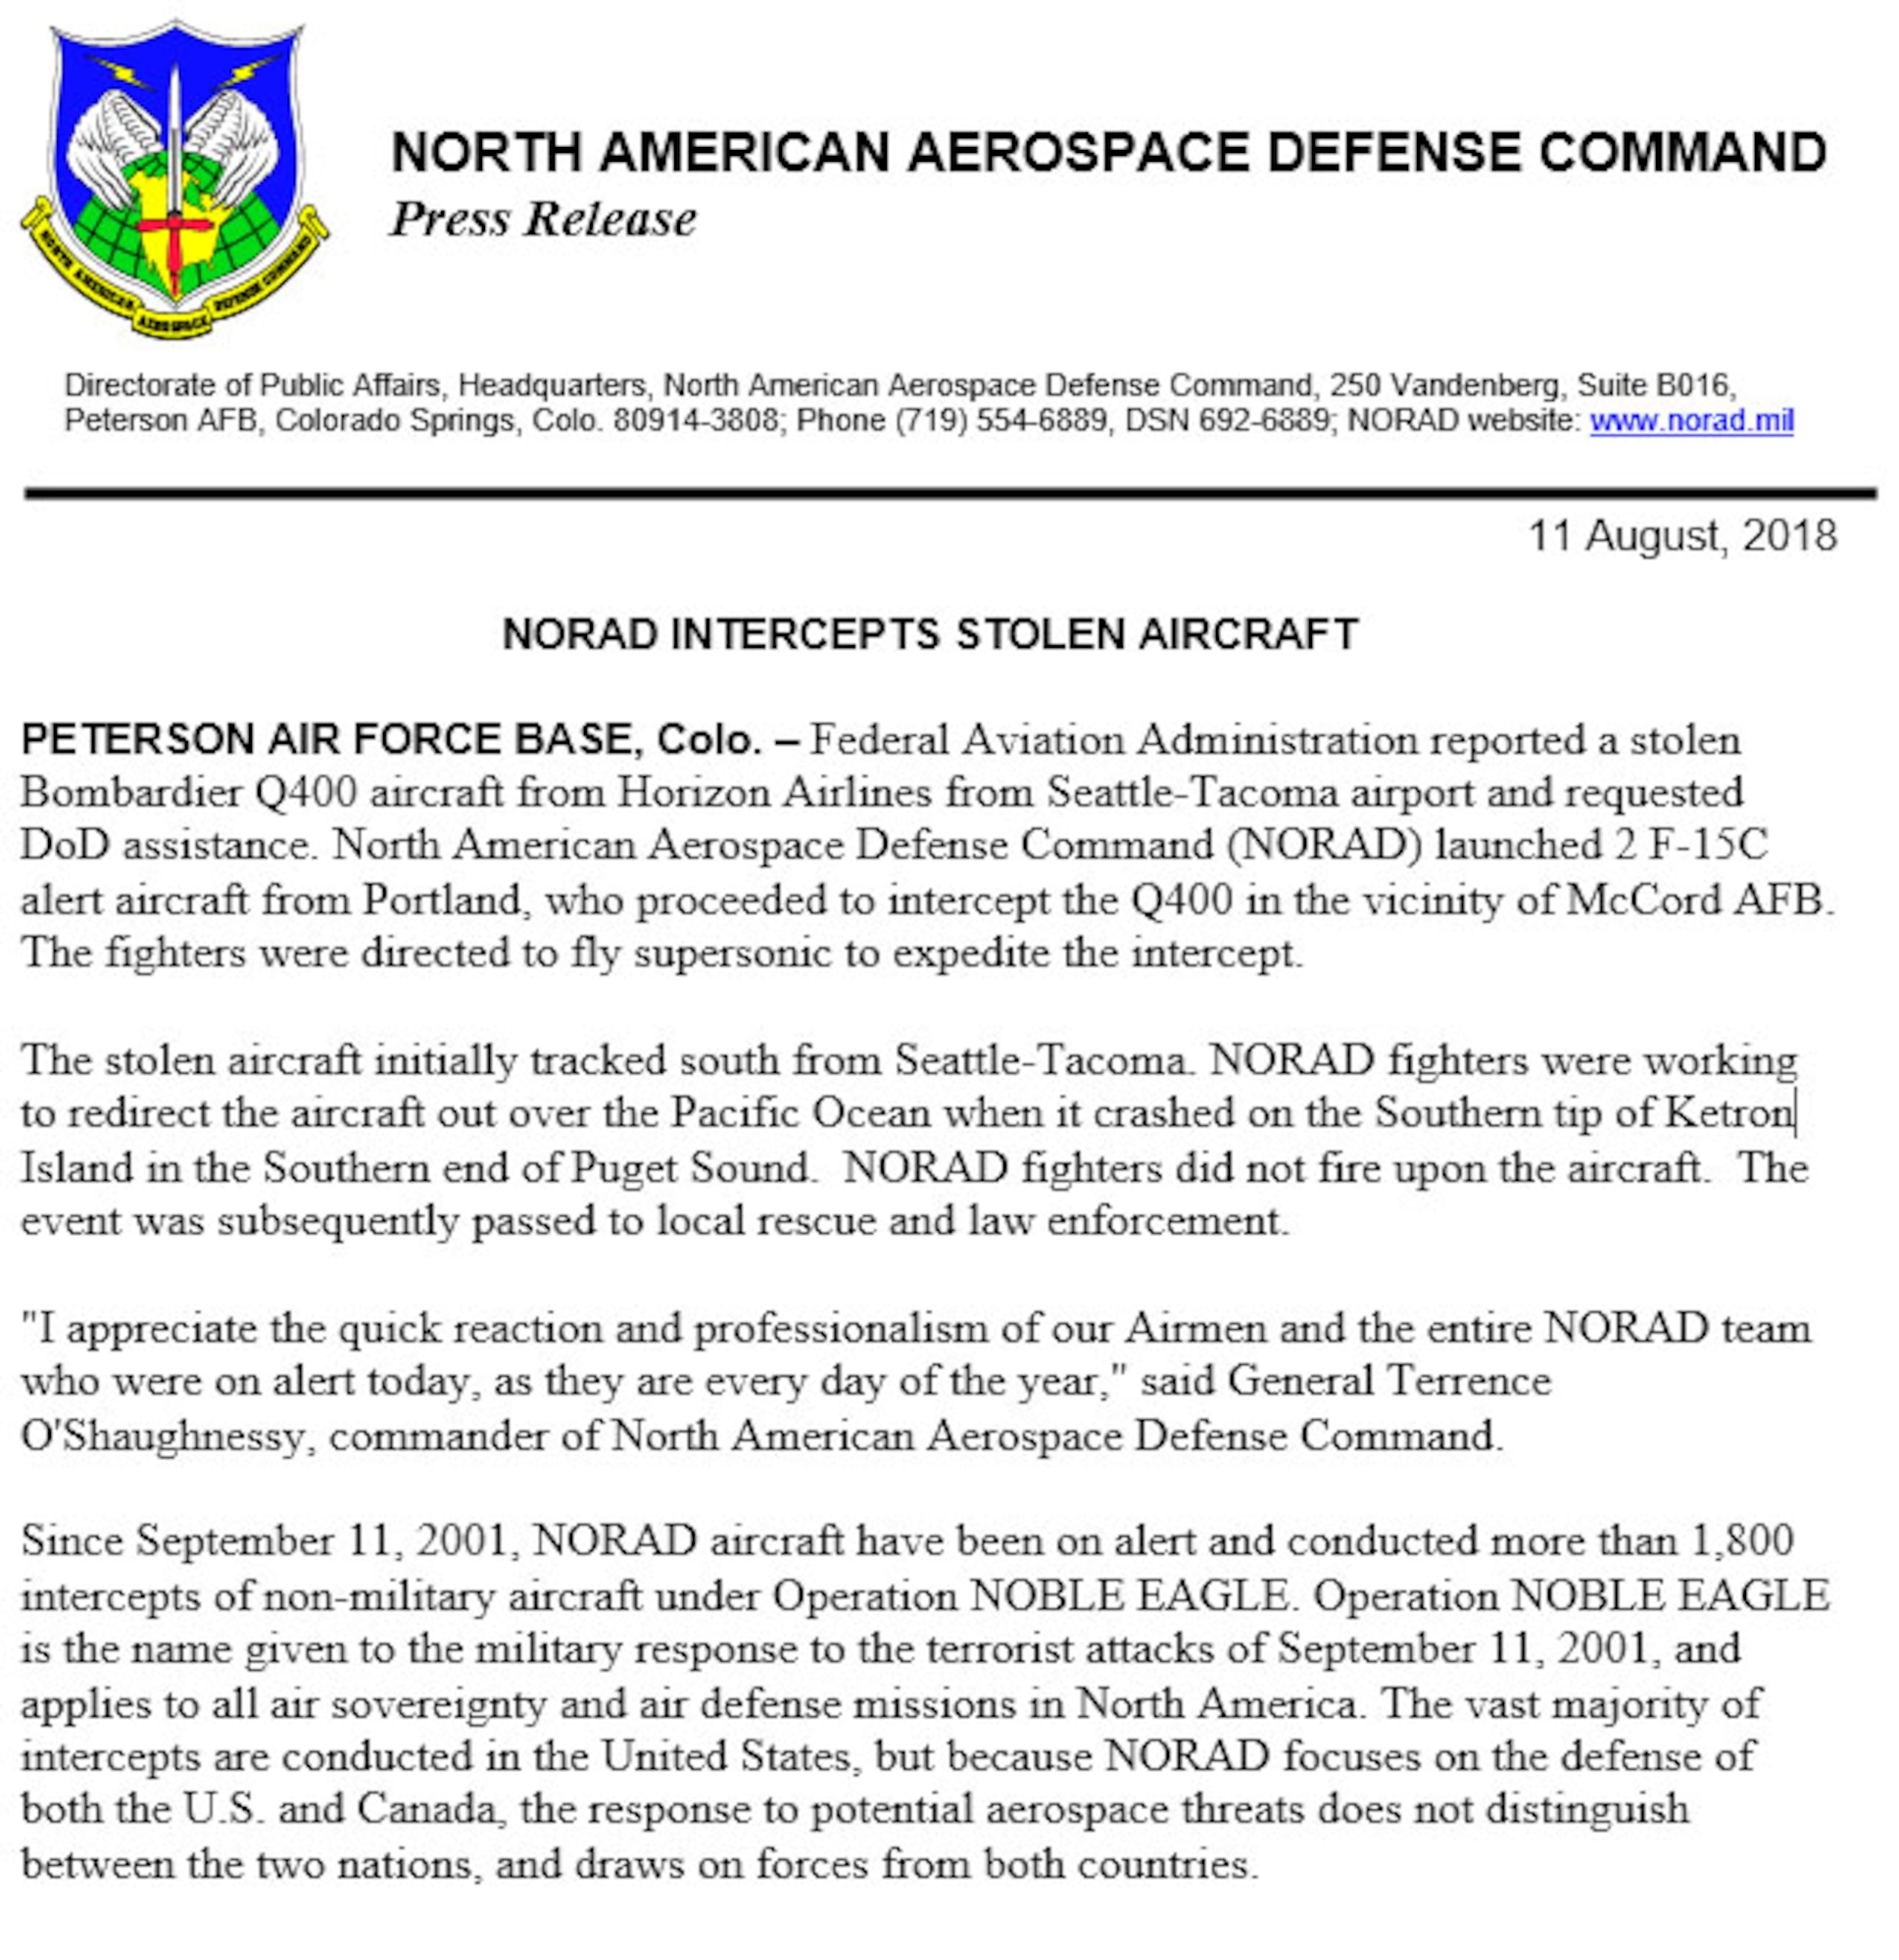 NORAD launched two F-15C alert aircraft from Portland, who proceeded to intercept a Horizon Airlines Bombardier Q400 in the vicinity of Joint Base Lewis-McChord Aug 10, 2018.  The aircraft crashed on Ketron Island near JBLM.  (U.S. Air Force photo by NORAD Public Affairs)